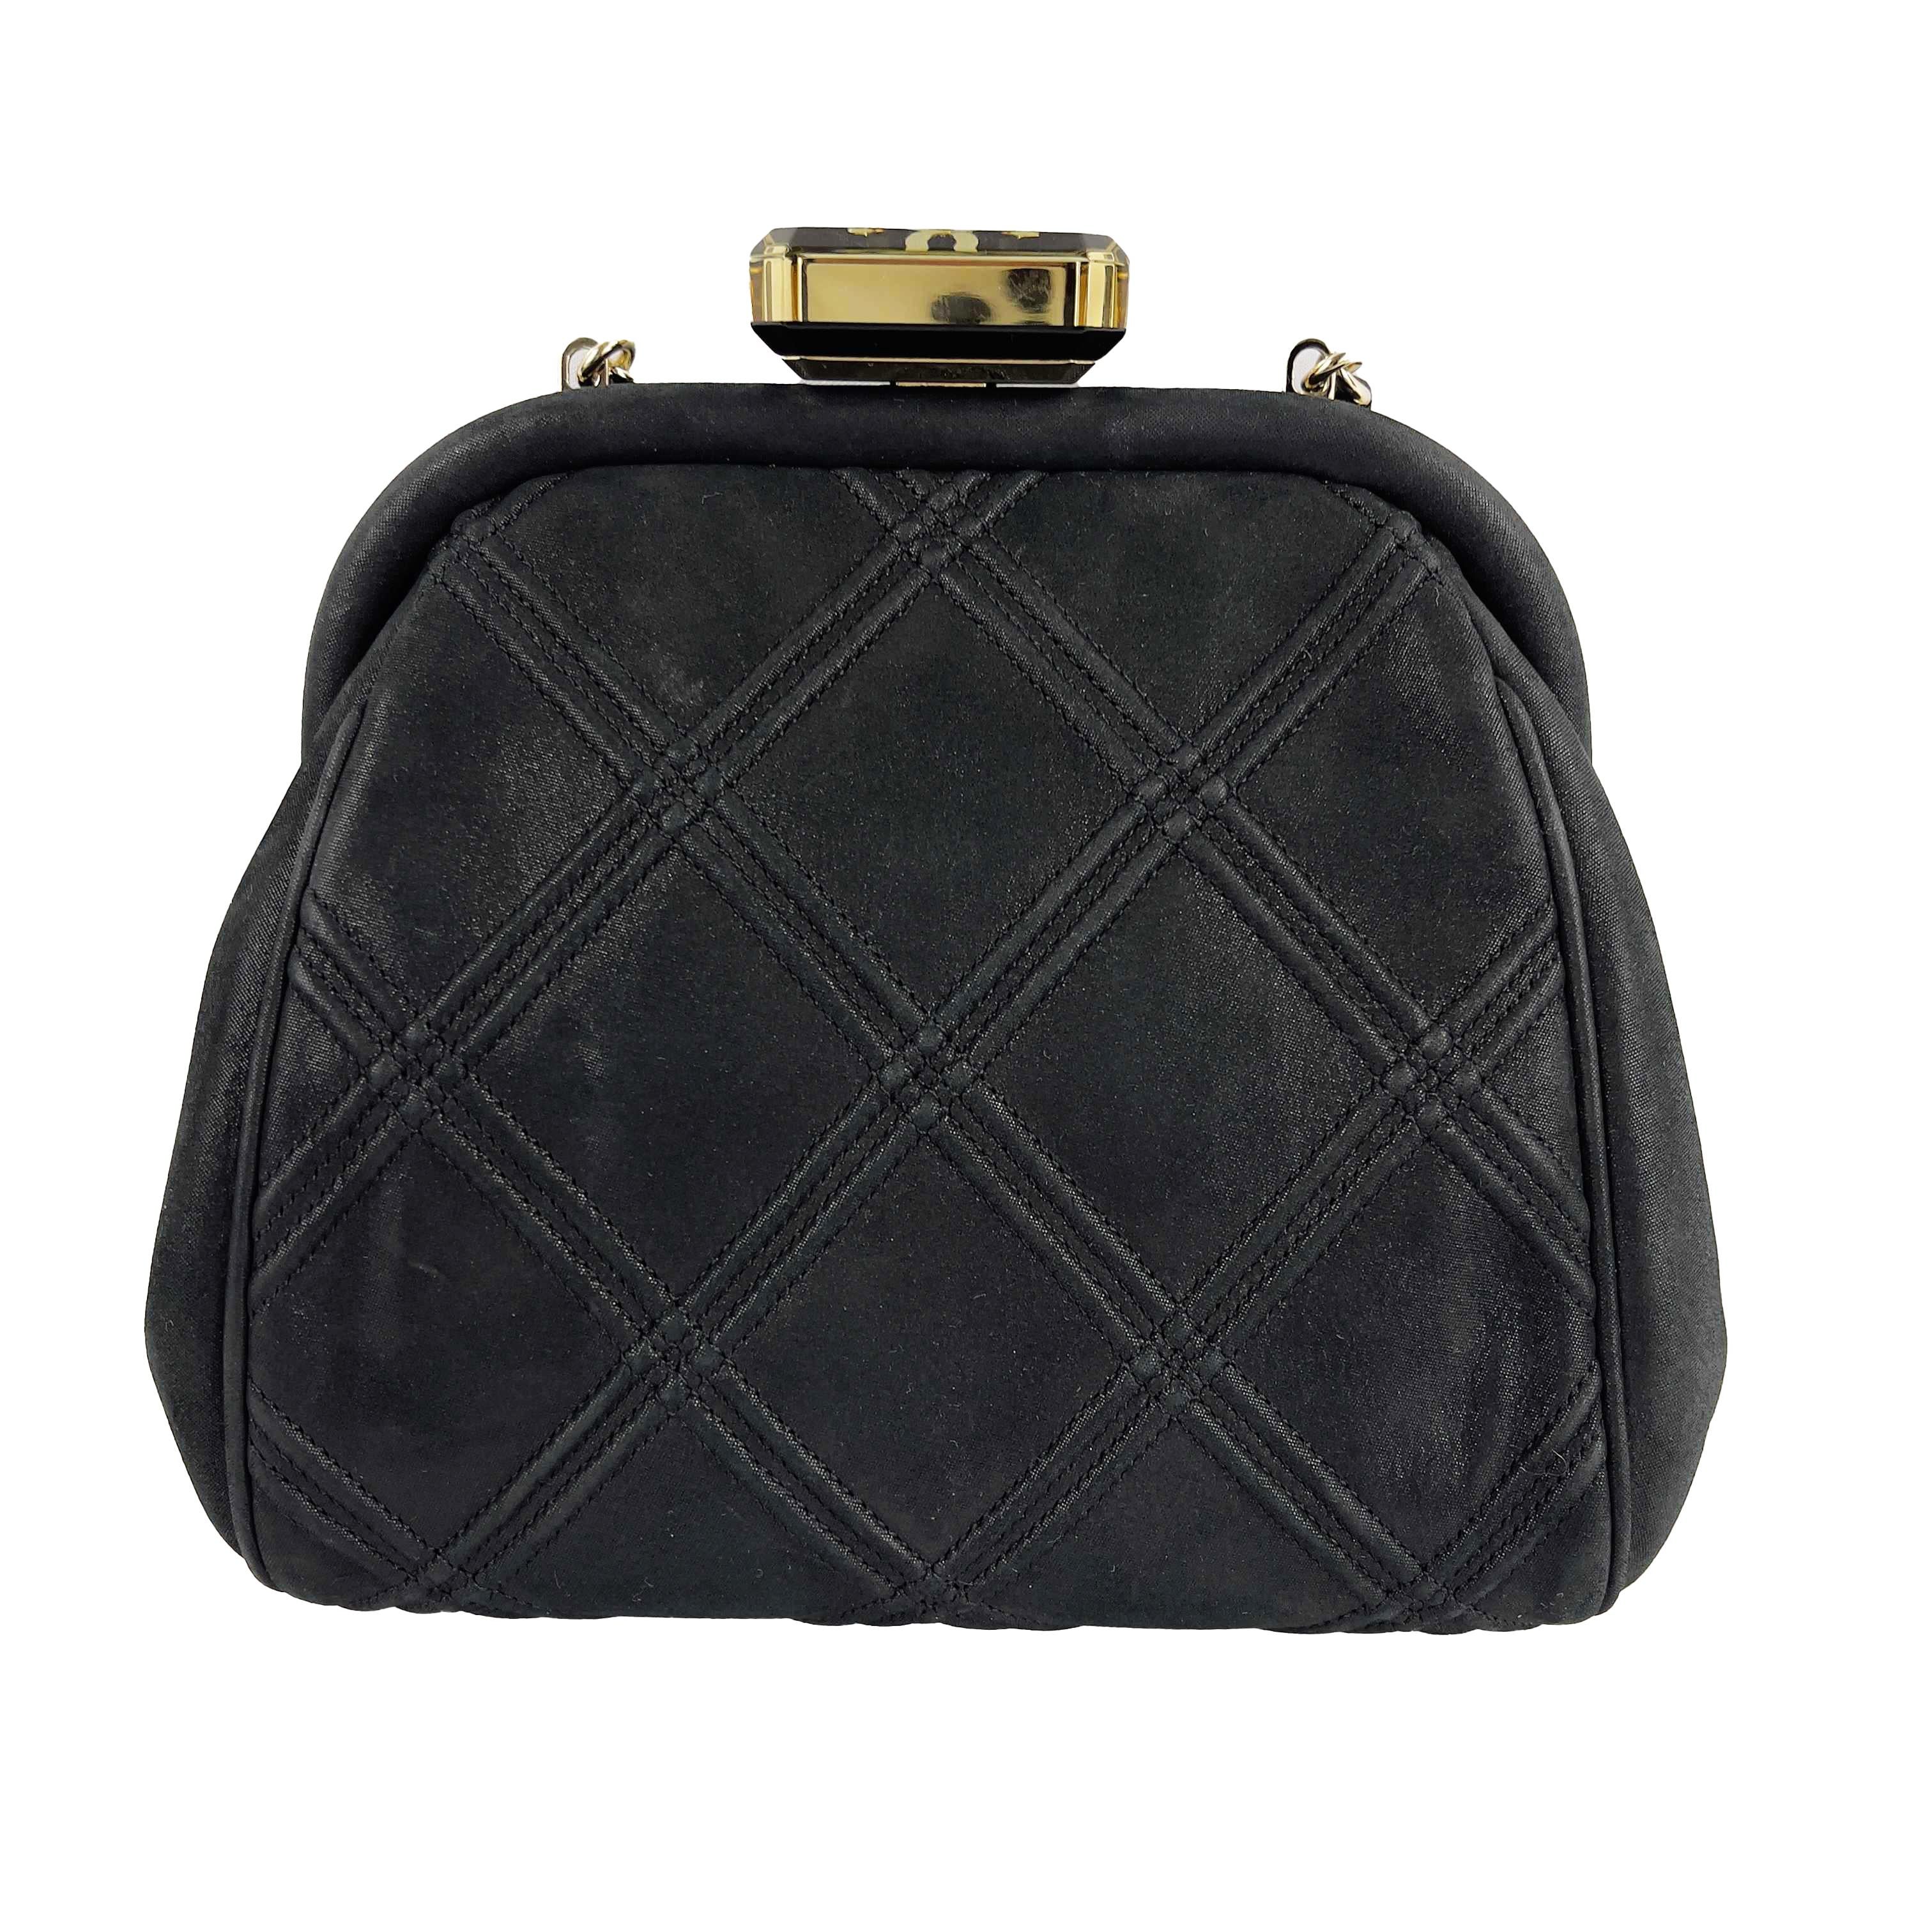 CHANEL - Mini Crossbody Clutch - Black Quilted /Gold-tone - 'CHANEL' Closure

Description

Crafted in black calf leather with double diamond stitching.
Features a long crossbody interlaced with a leather gold chain and elegant CC lock.
This